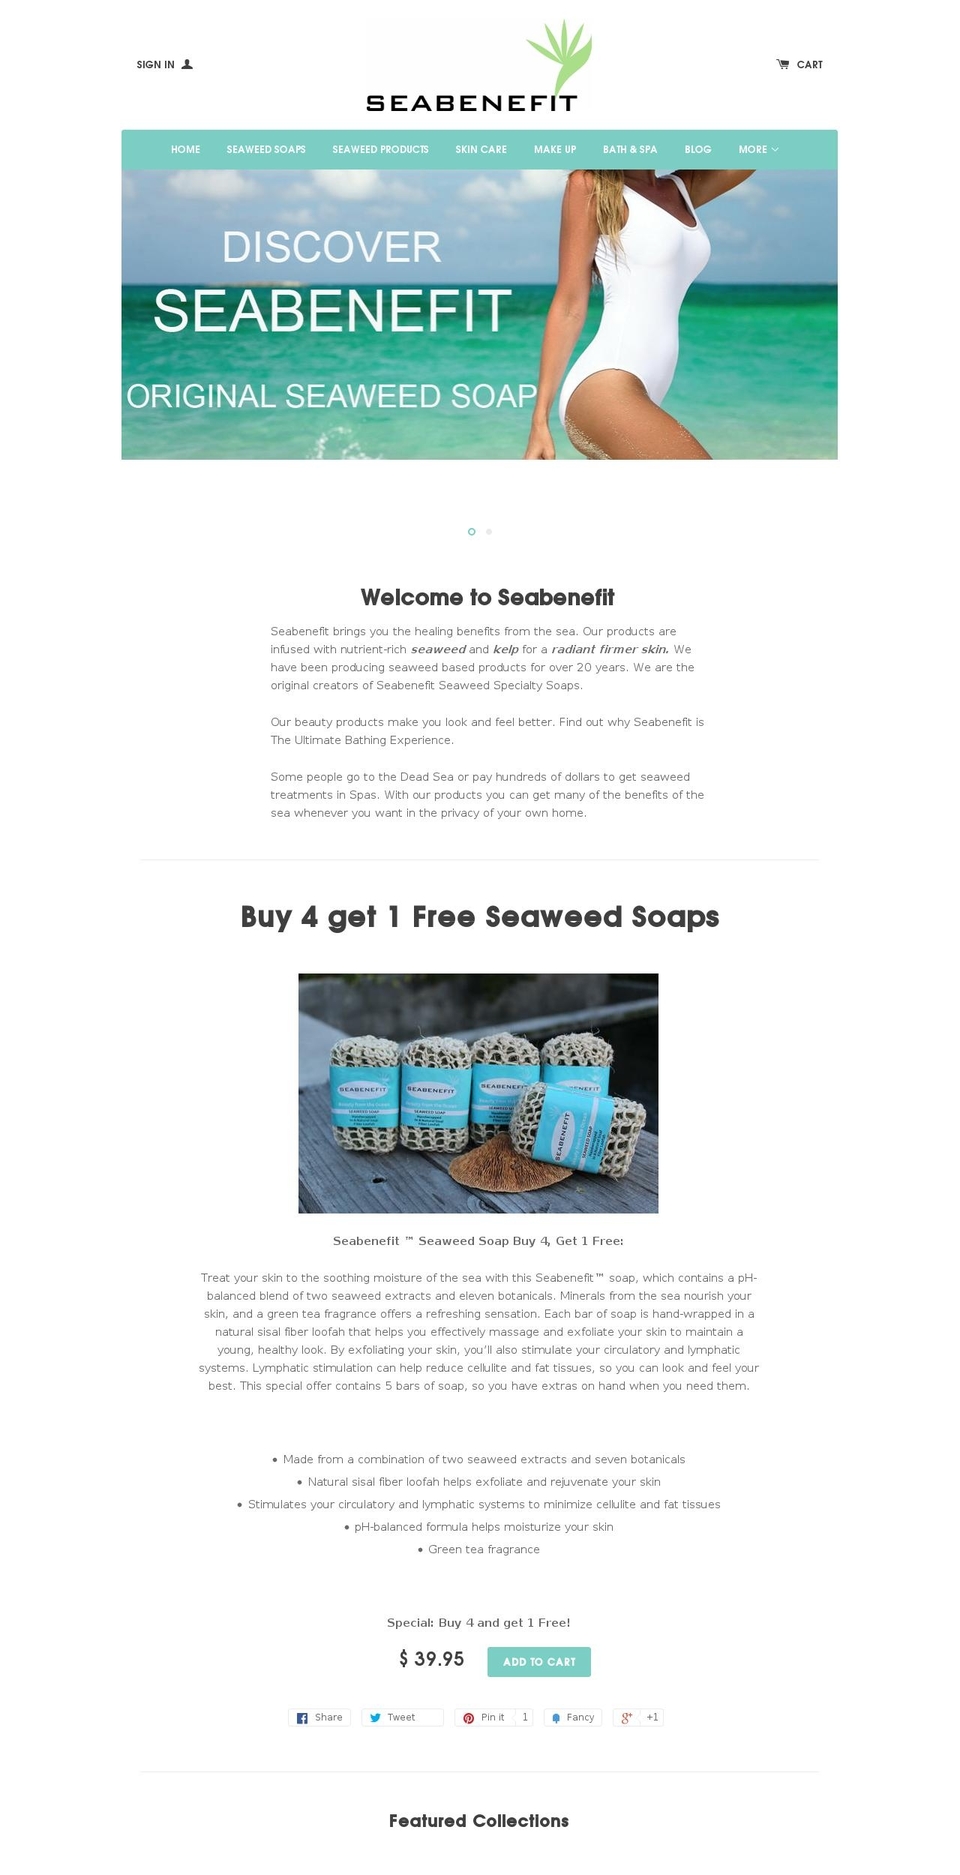 Providence Shopify theme site example seabenefit.com